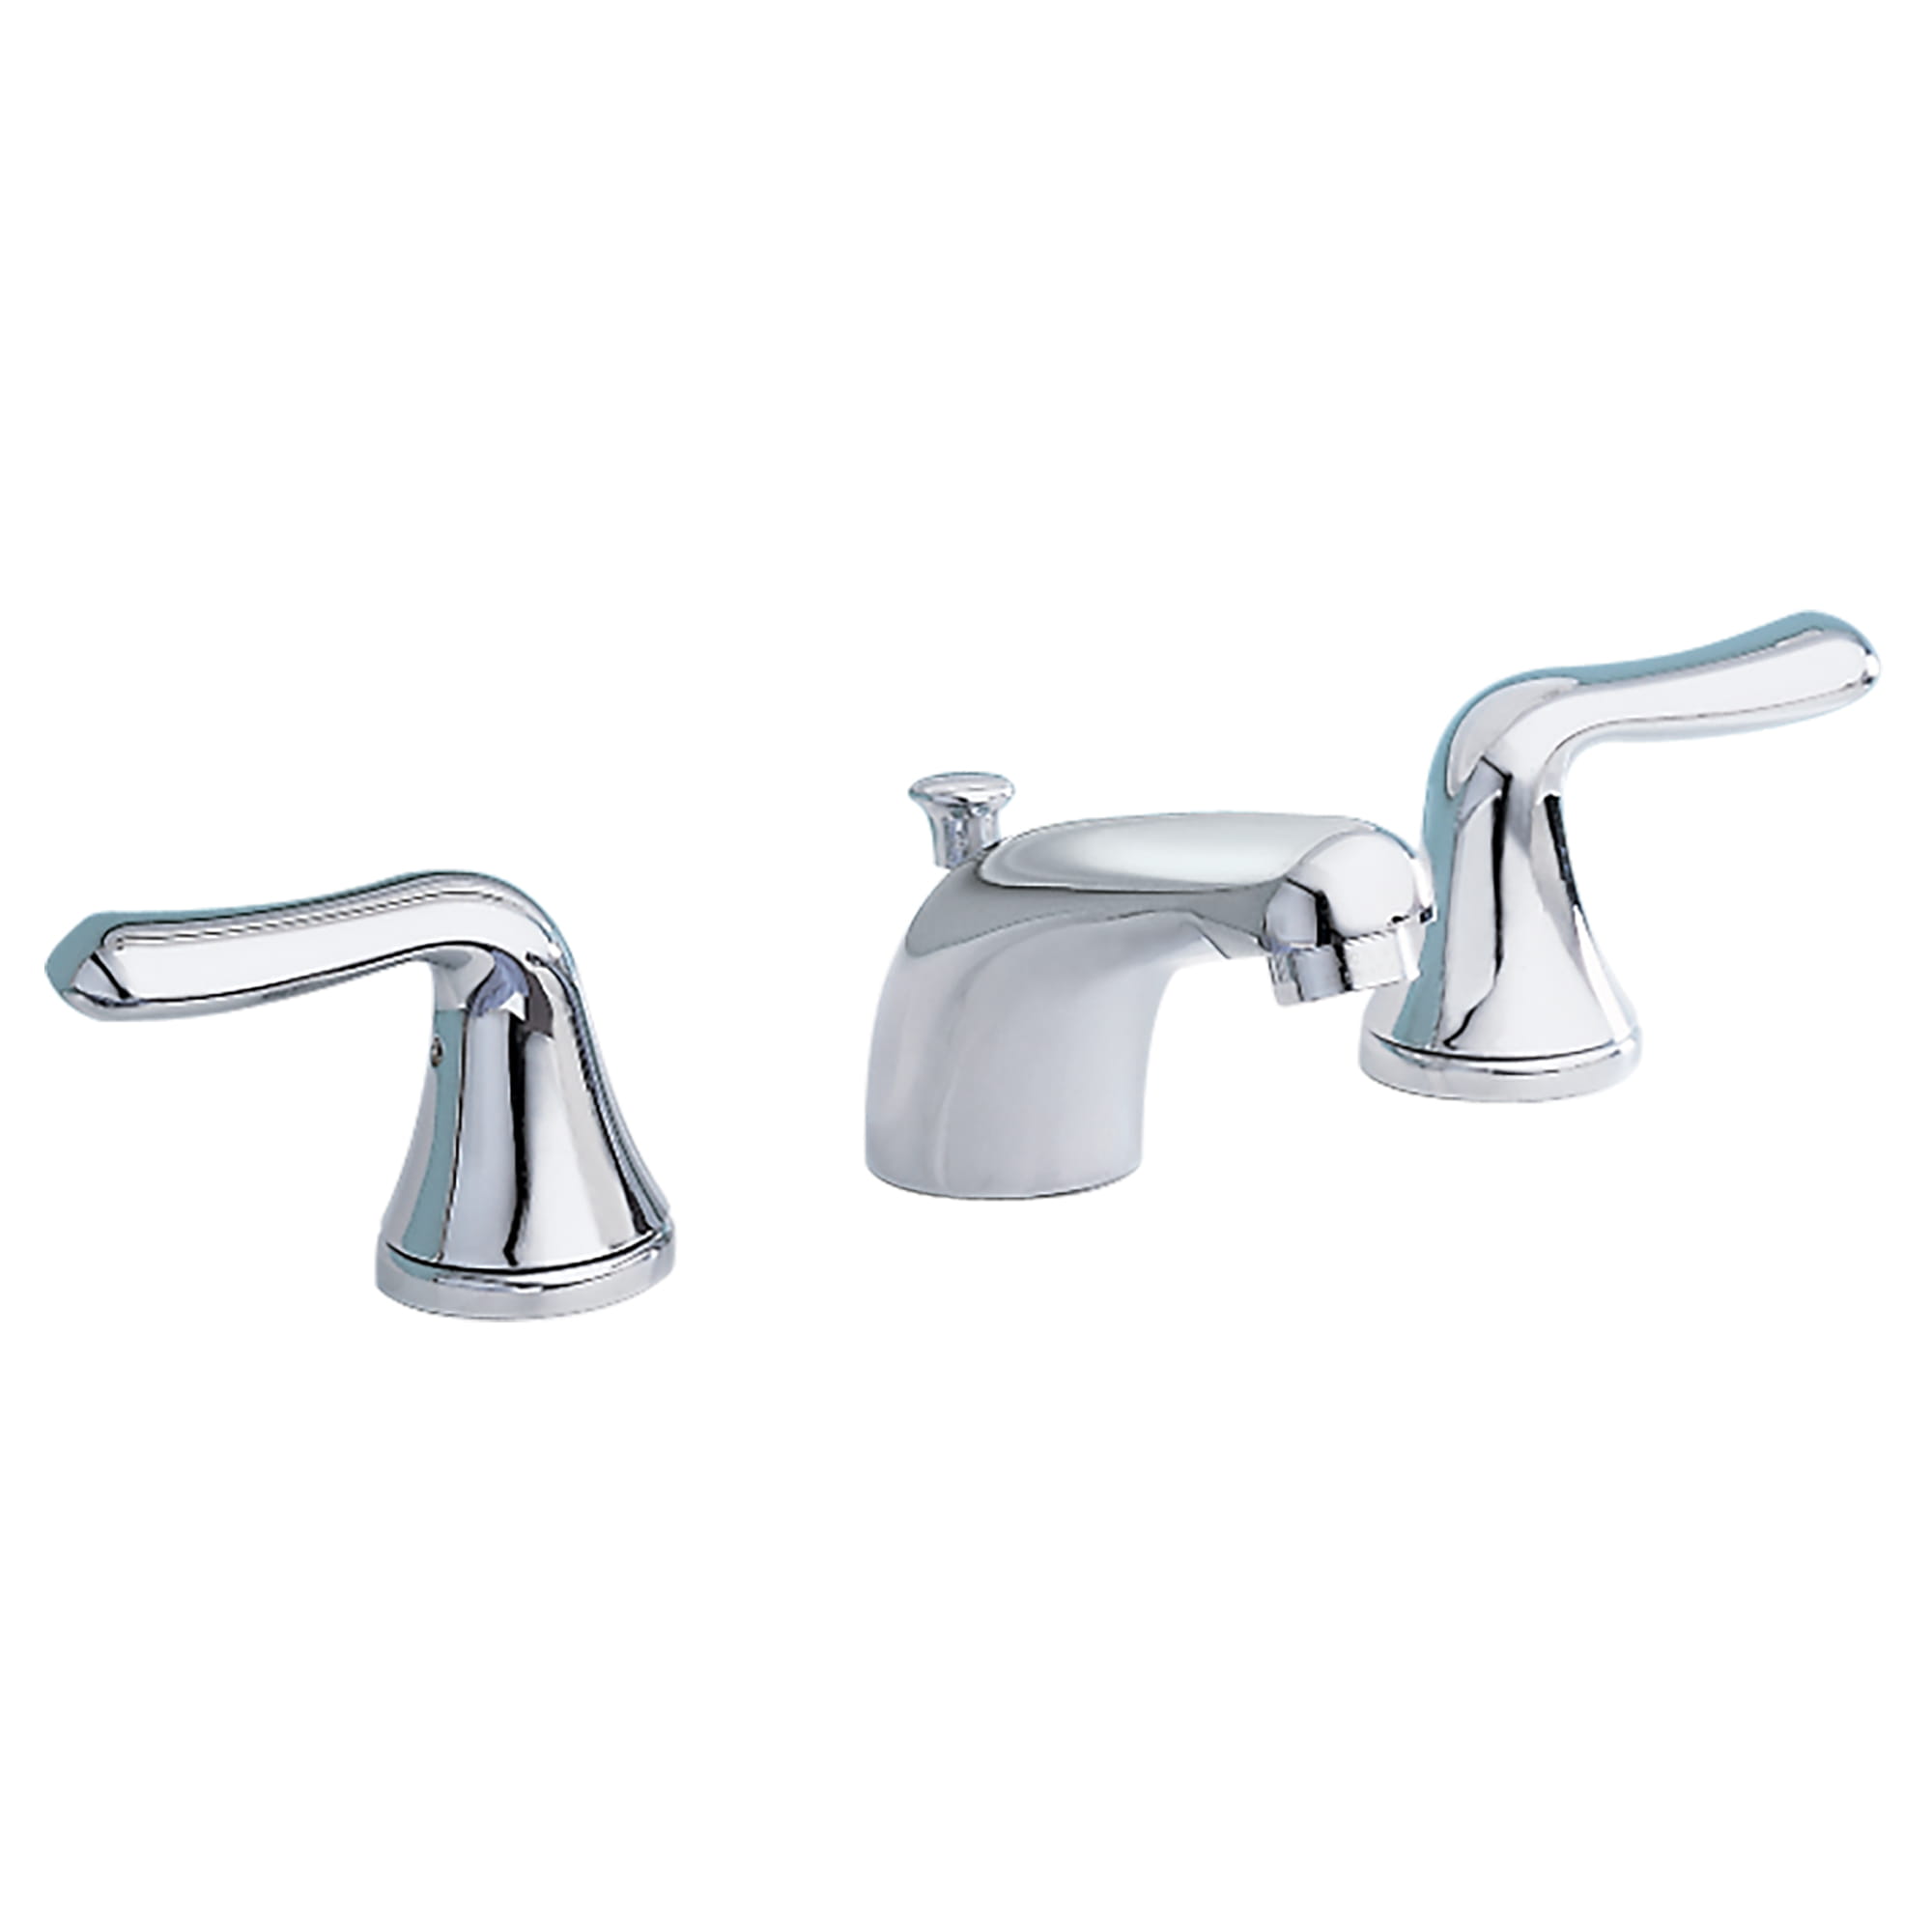 Colony® Soft 8-Inch Widespread 2-Handle Bathroom Faucet 1.2 gpm/4.5 L/min With Lever Handles